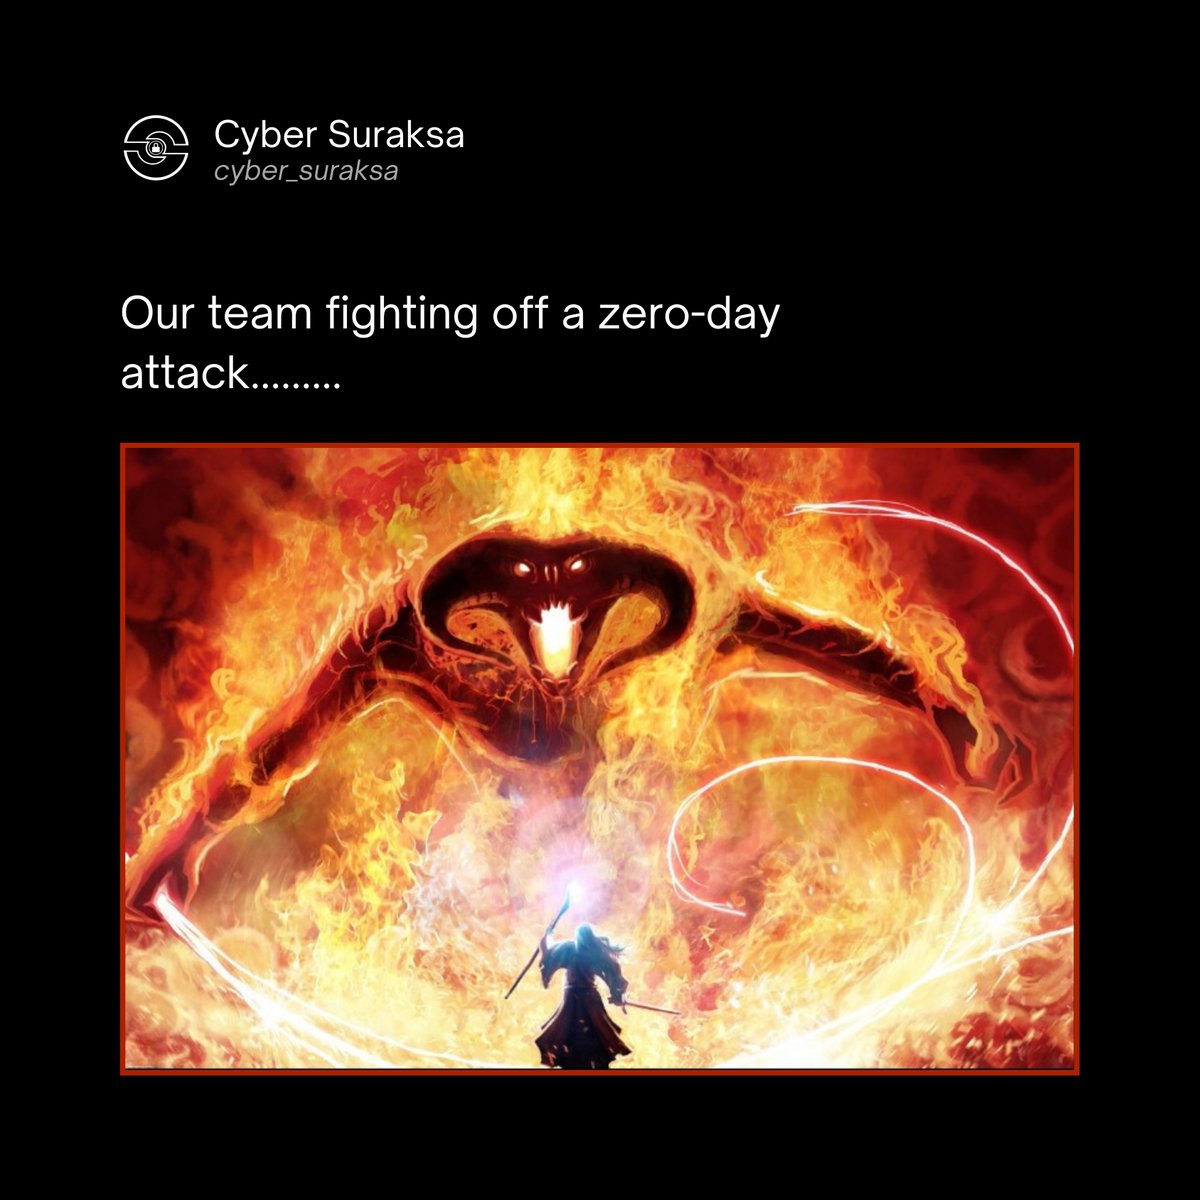 When our team works together to confront a zero-day attack, it's like Gandalf standing up to the Balrog! 'You shall not pass!' 💥💻

➡ Follow @CyberSuraksa

#memes #memeoftheday #teamwork #cybersecurityteam #cyberdefense #infosec #cybersecurityservices #cybersuraksa